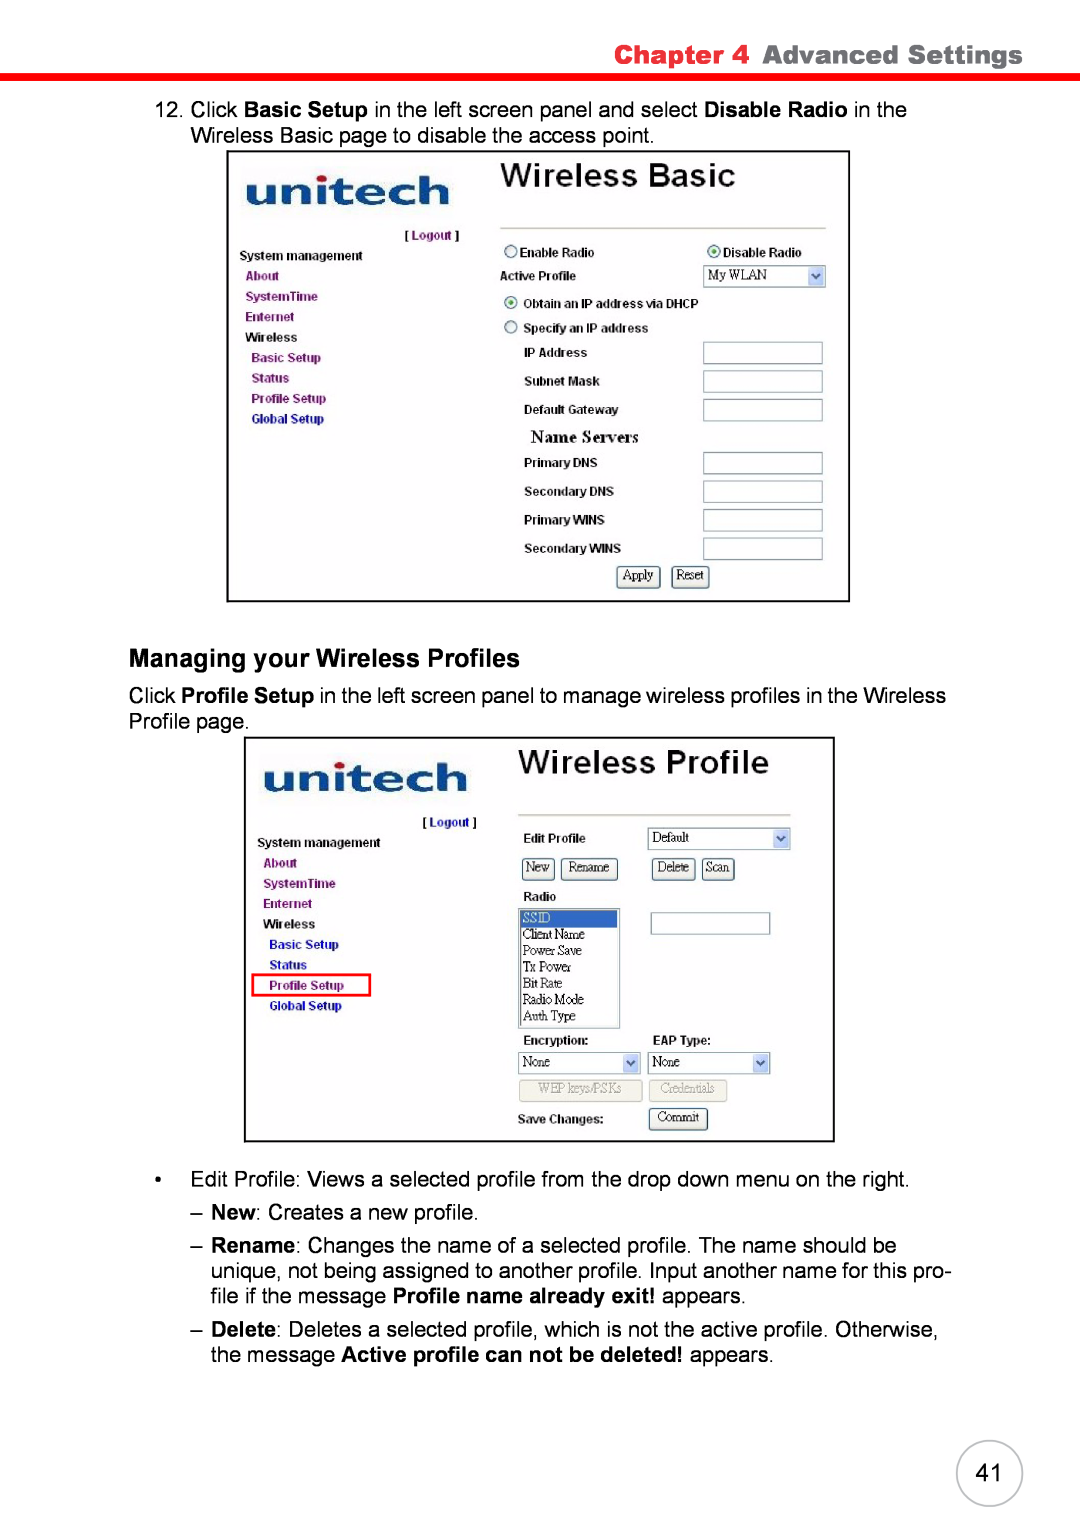 Unitech RS700 user manual Managing your Wireless Profiles, Advanced Settings 